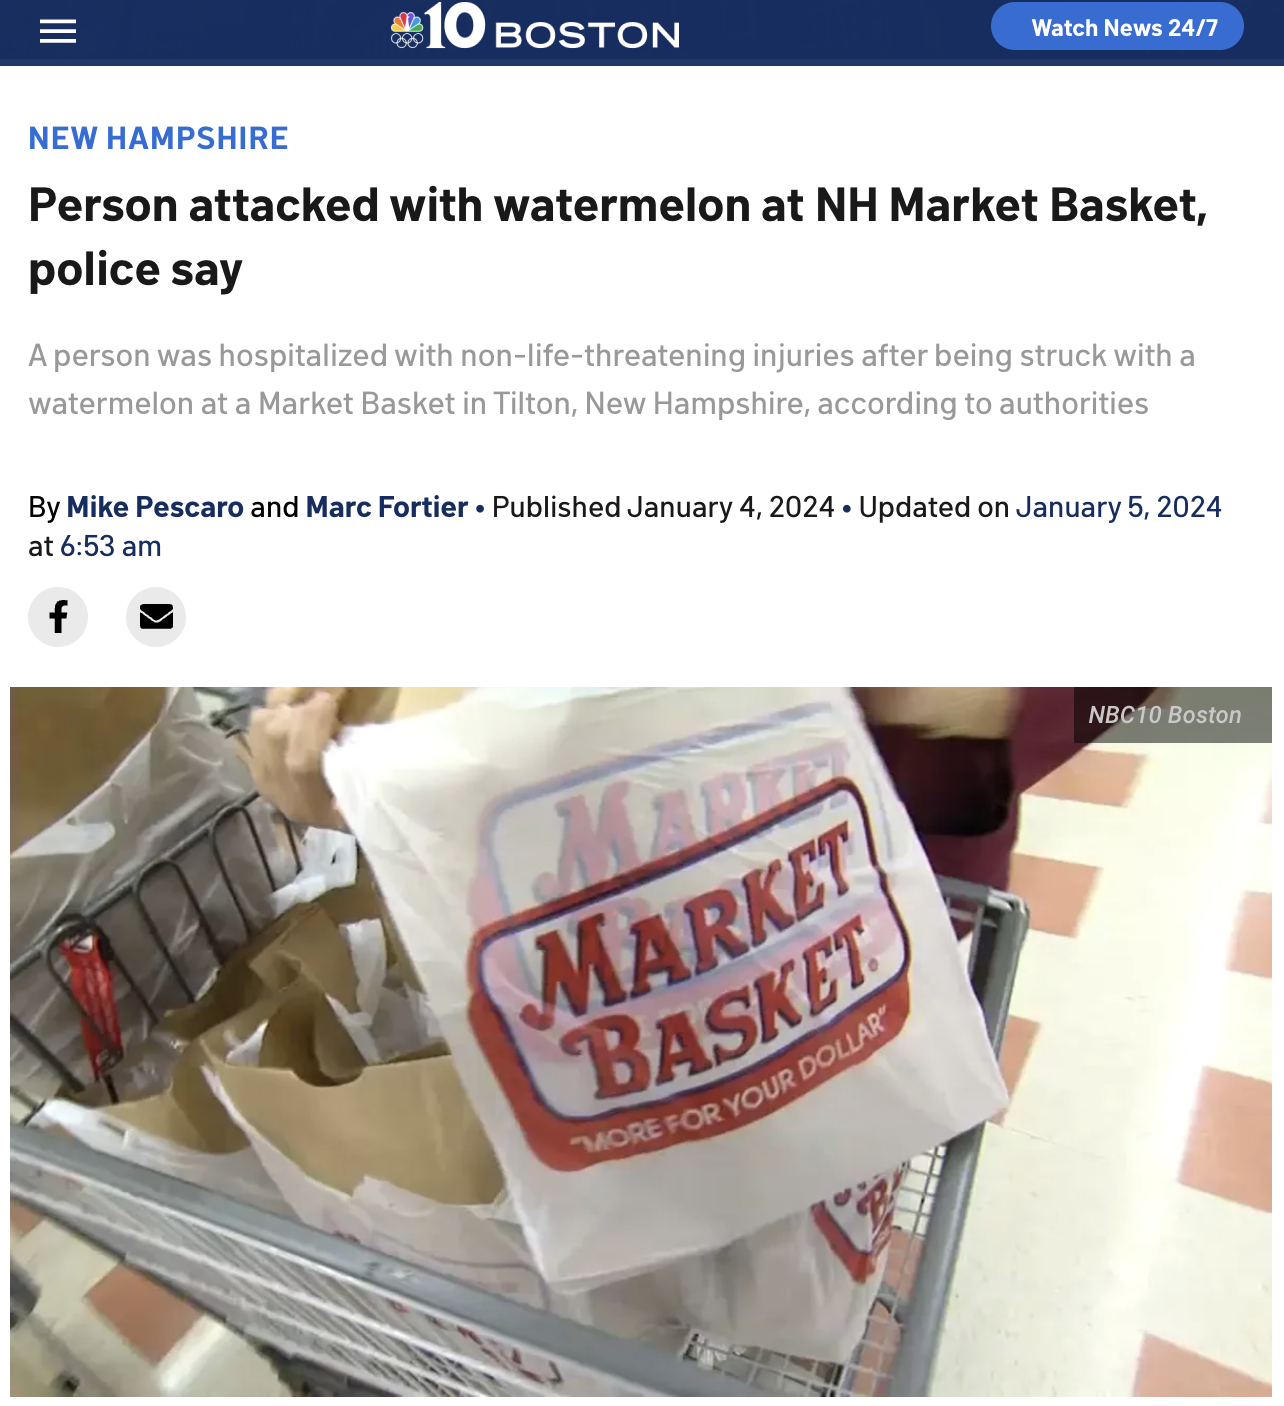 screenshot - 10 Boston Watch News 247 New Hampshire Person attacked with watermelon at Nh Market Basket, police say A person was hospitalized with nonlifethreatening injuries after being struck with a watermelon at a Market Basket in Tilton, New Hampshire